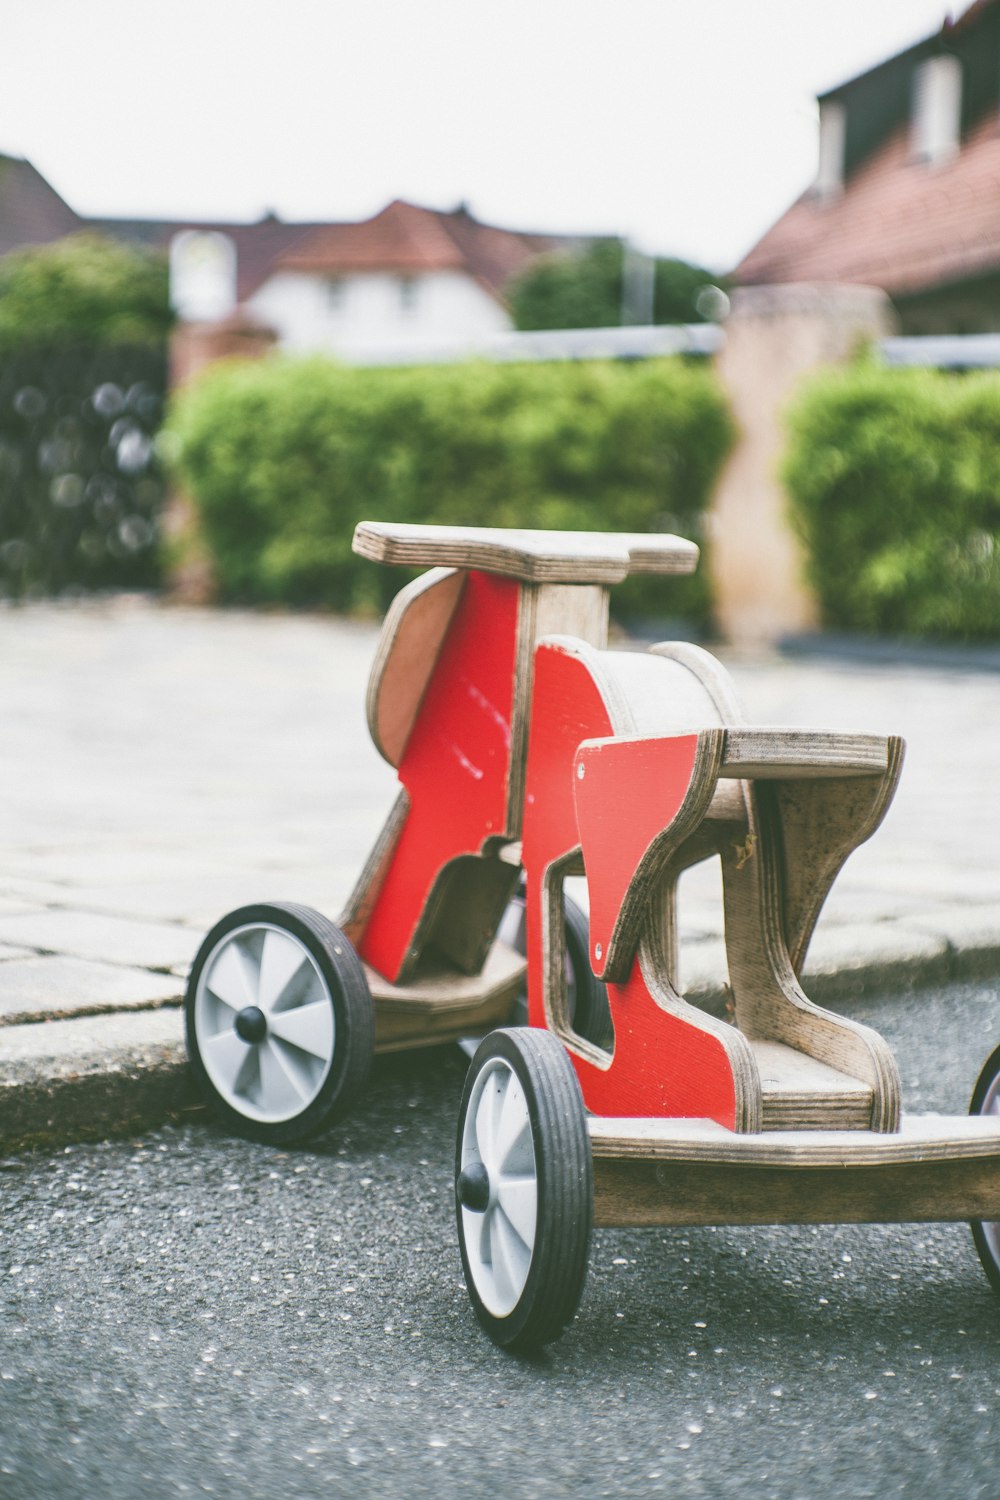 toddler's red and brown wooden ride-on toy on concrete pavement